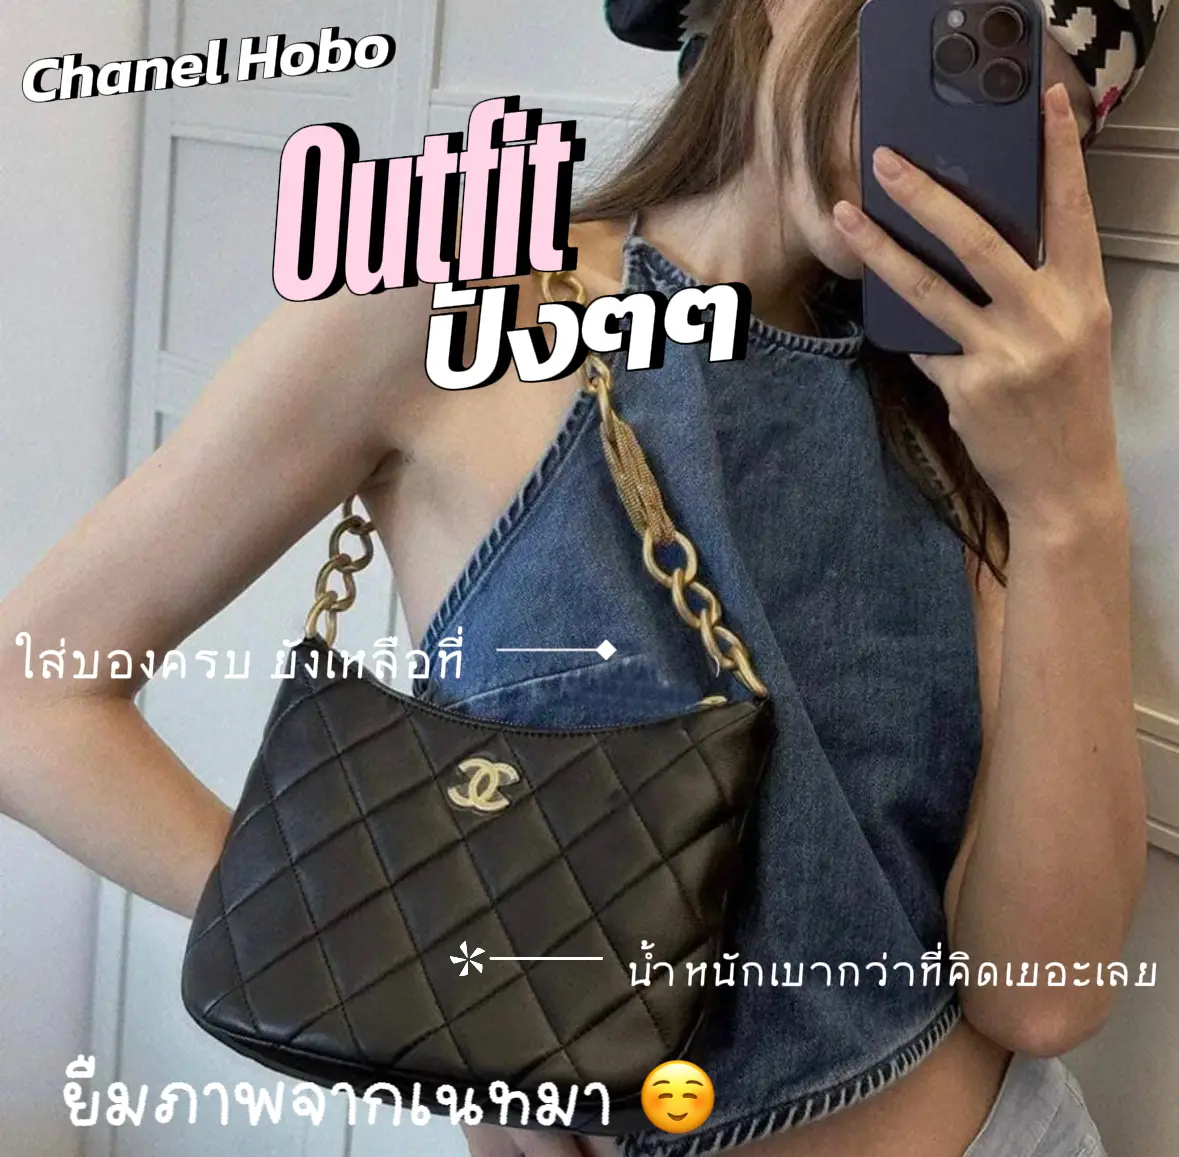 CHANEL Hobo Bag 23A, Gallery posted by Sbb_Brandname